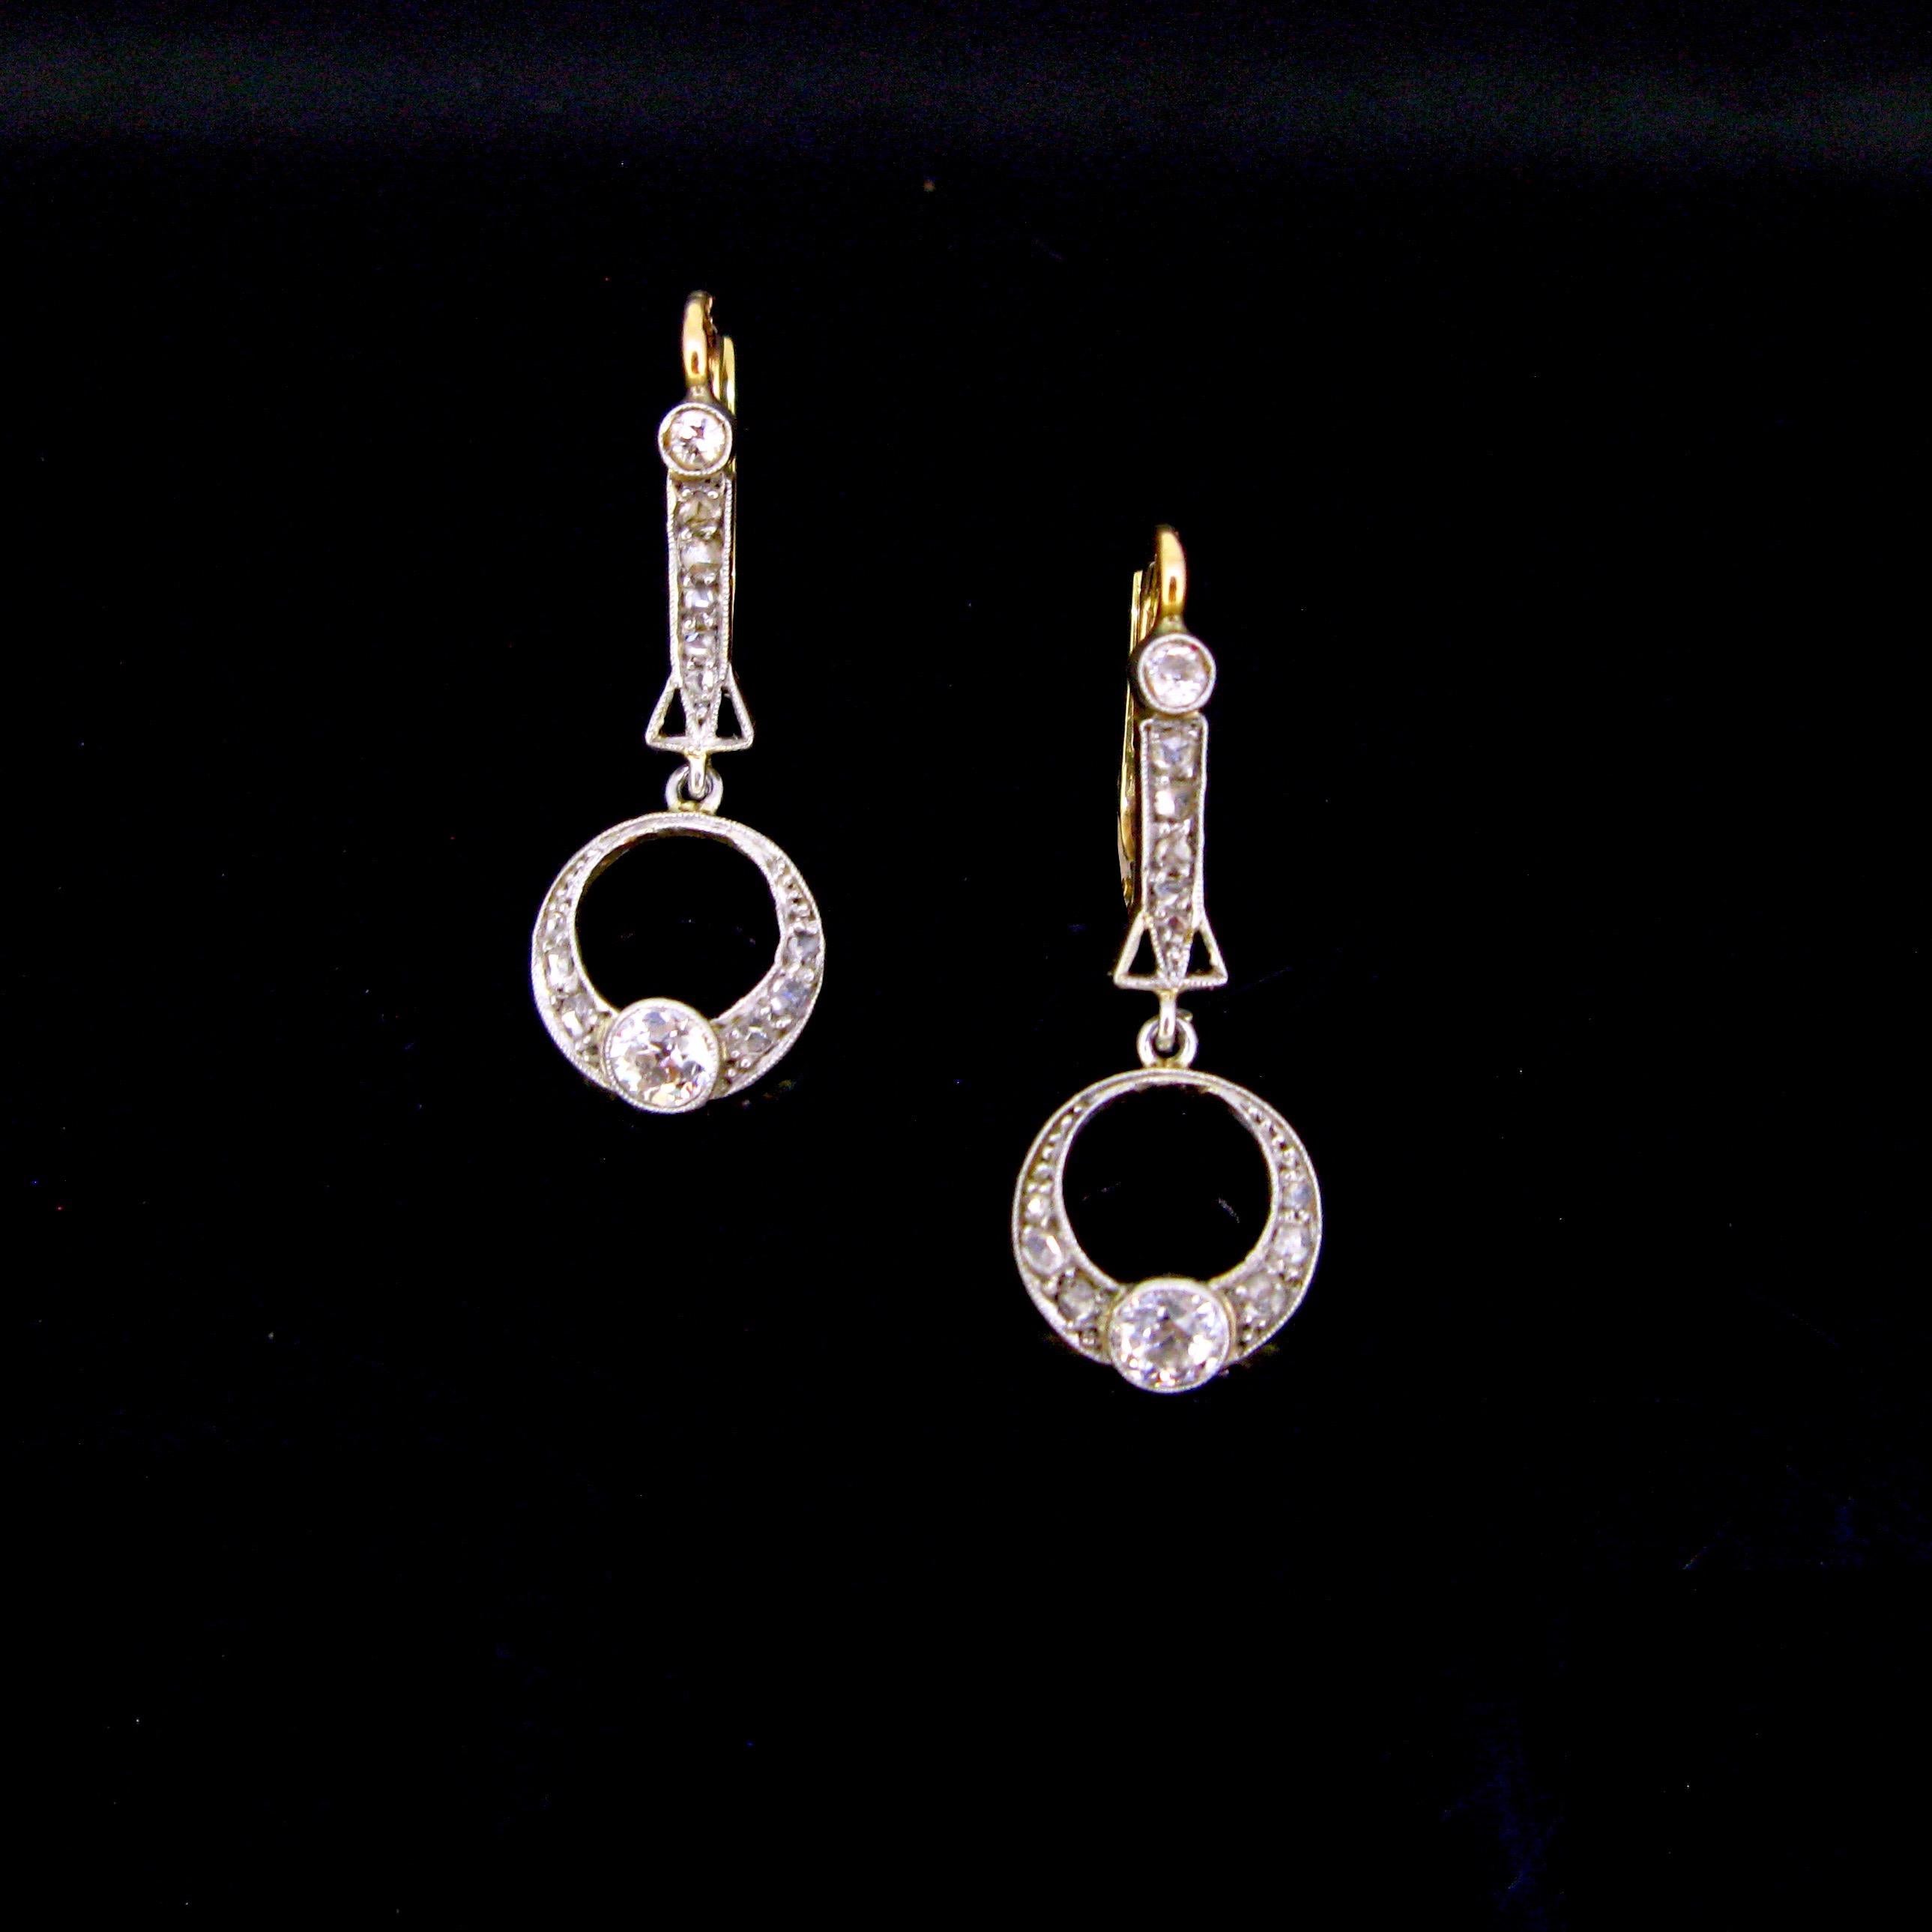 ritagem presents:

This beautiful pair of earrings is from early 20th century. The dangling bottom is adorned with an old cut diamond of 0.20ct approximately and rose cut diamonds, set on platinum. The top is also set with rose cut diamonds and an